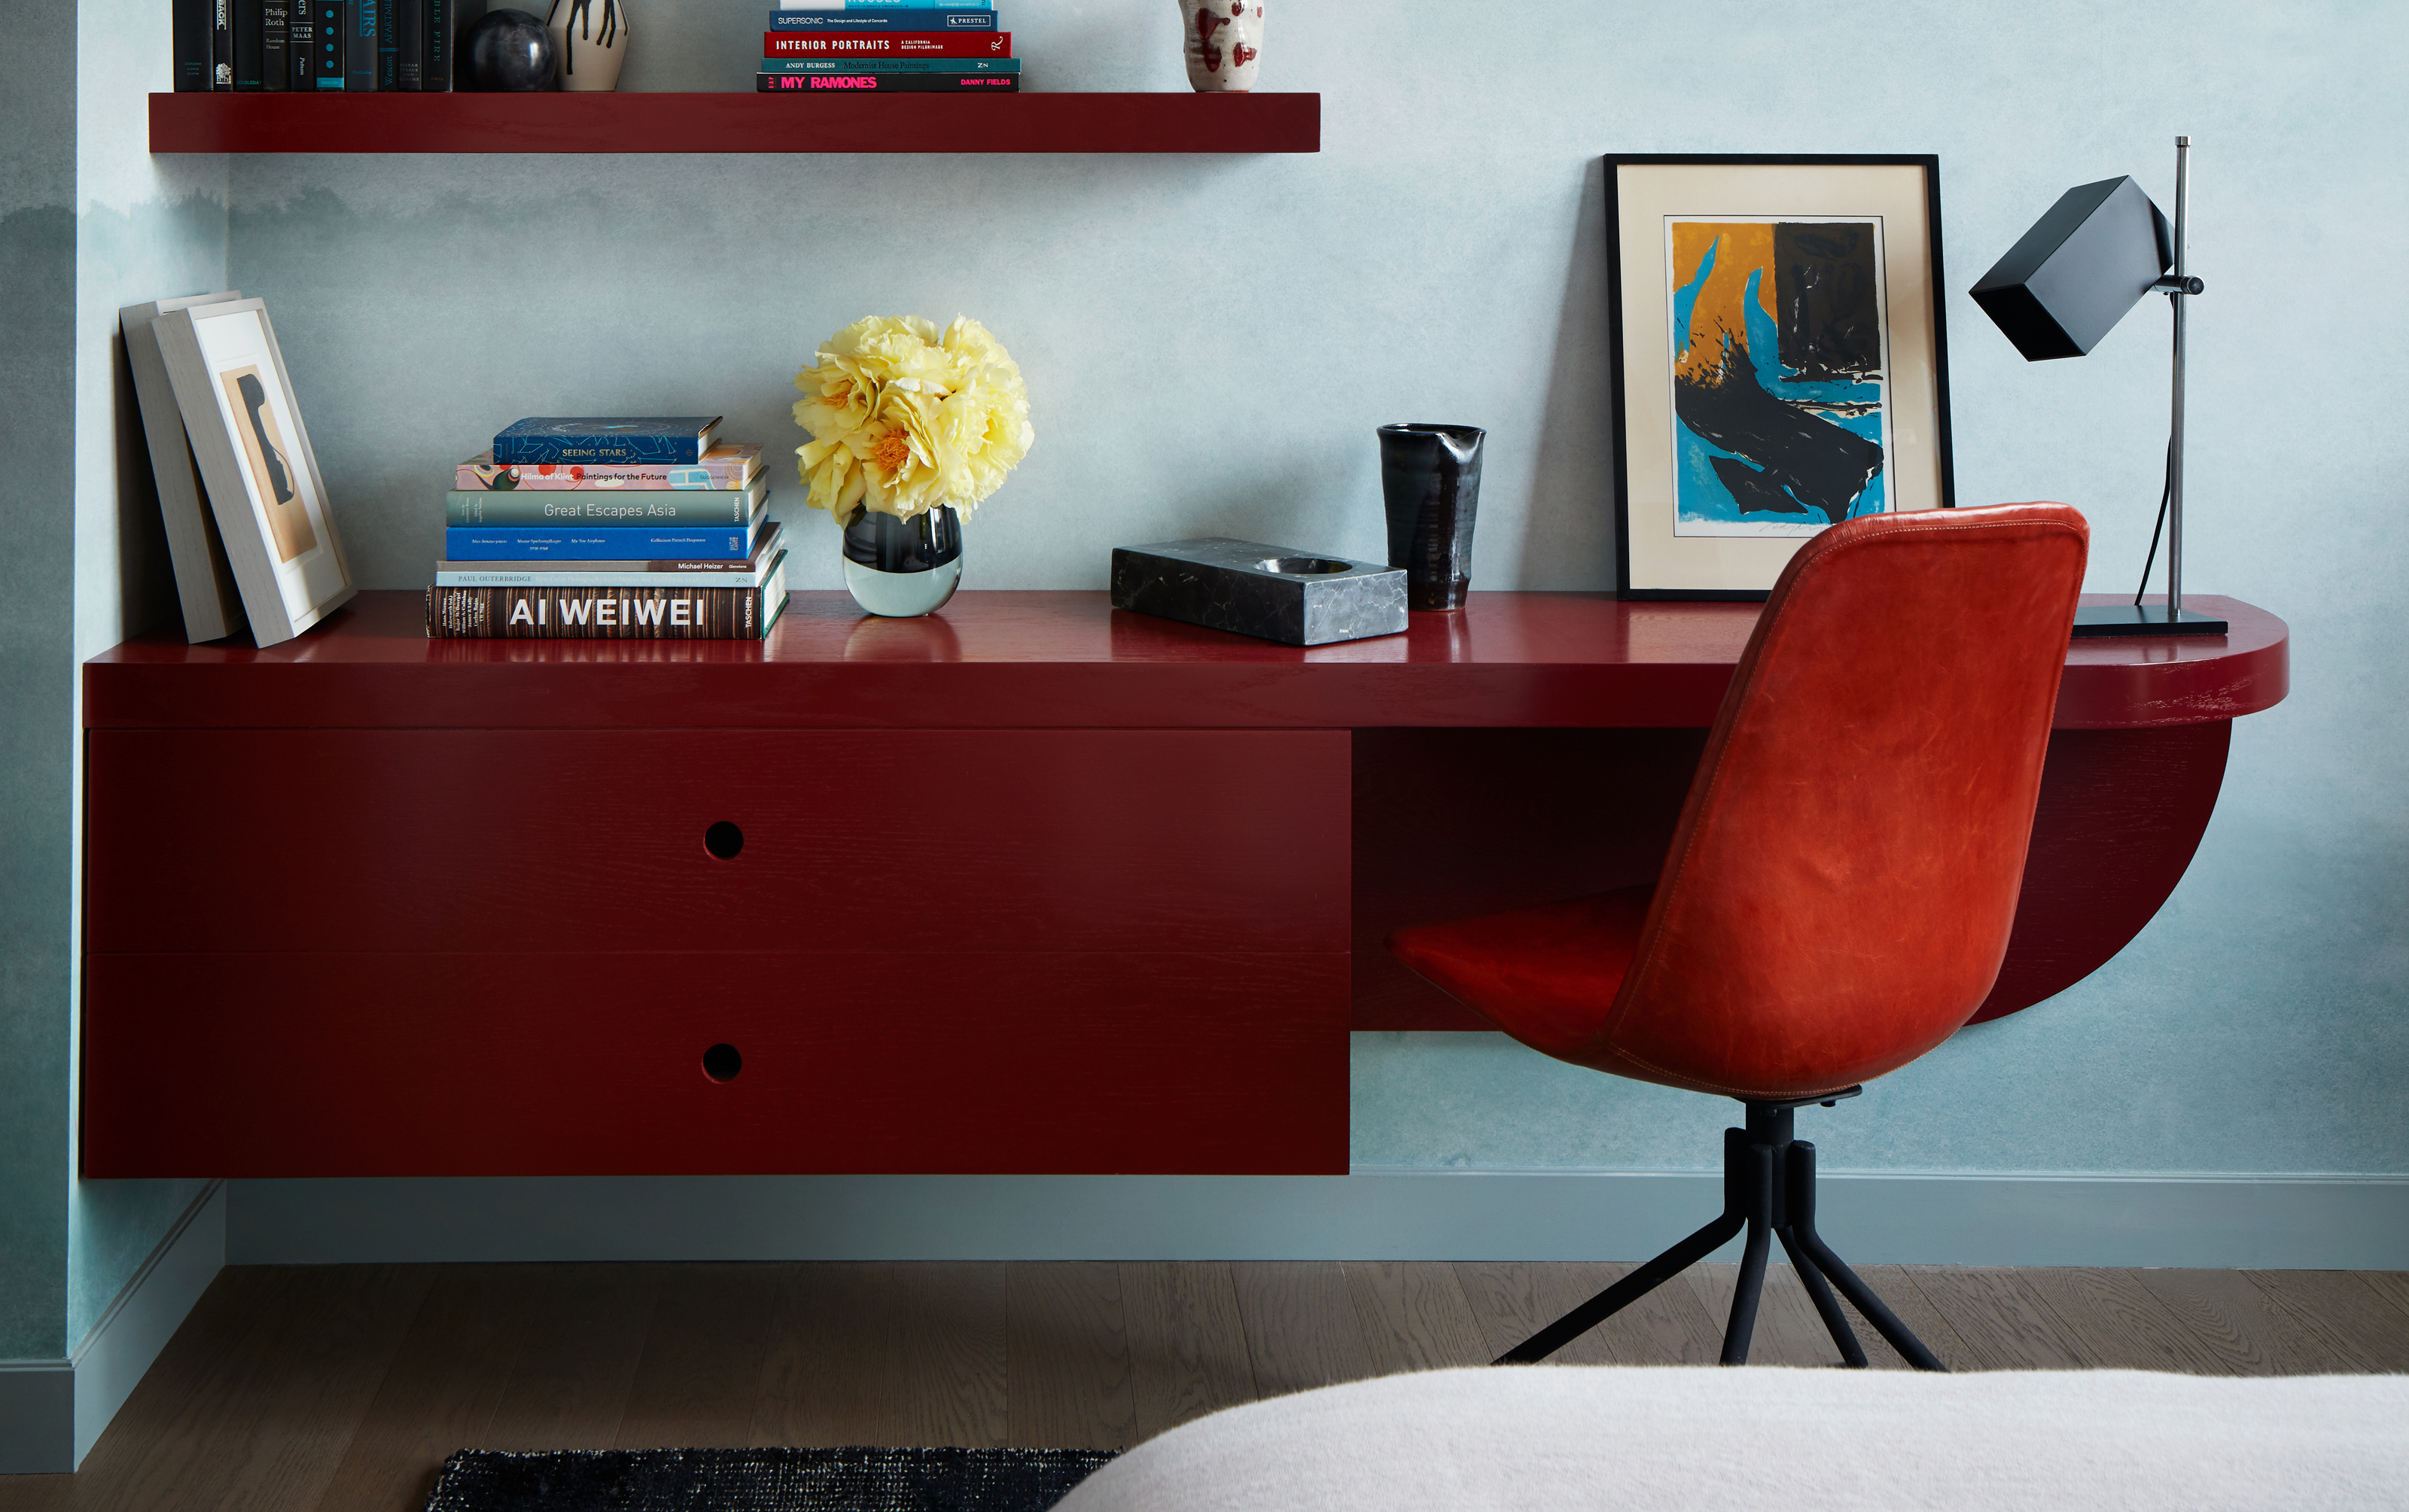 Genius built-in desk ideas to get more your WFH space |